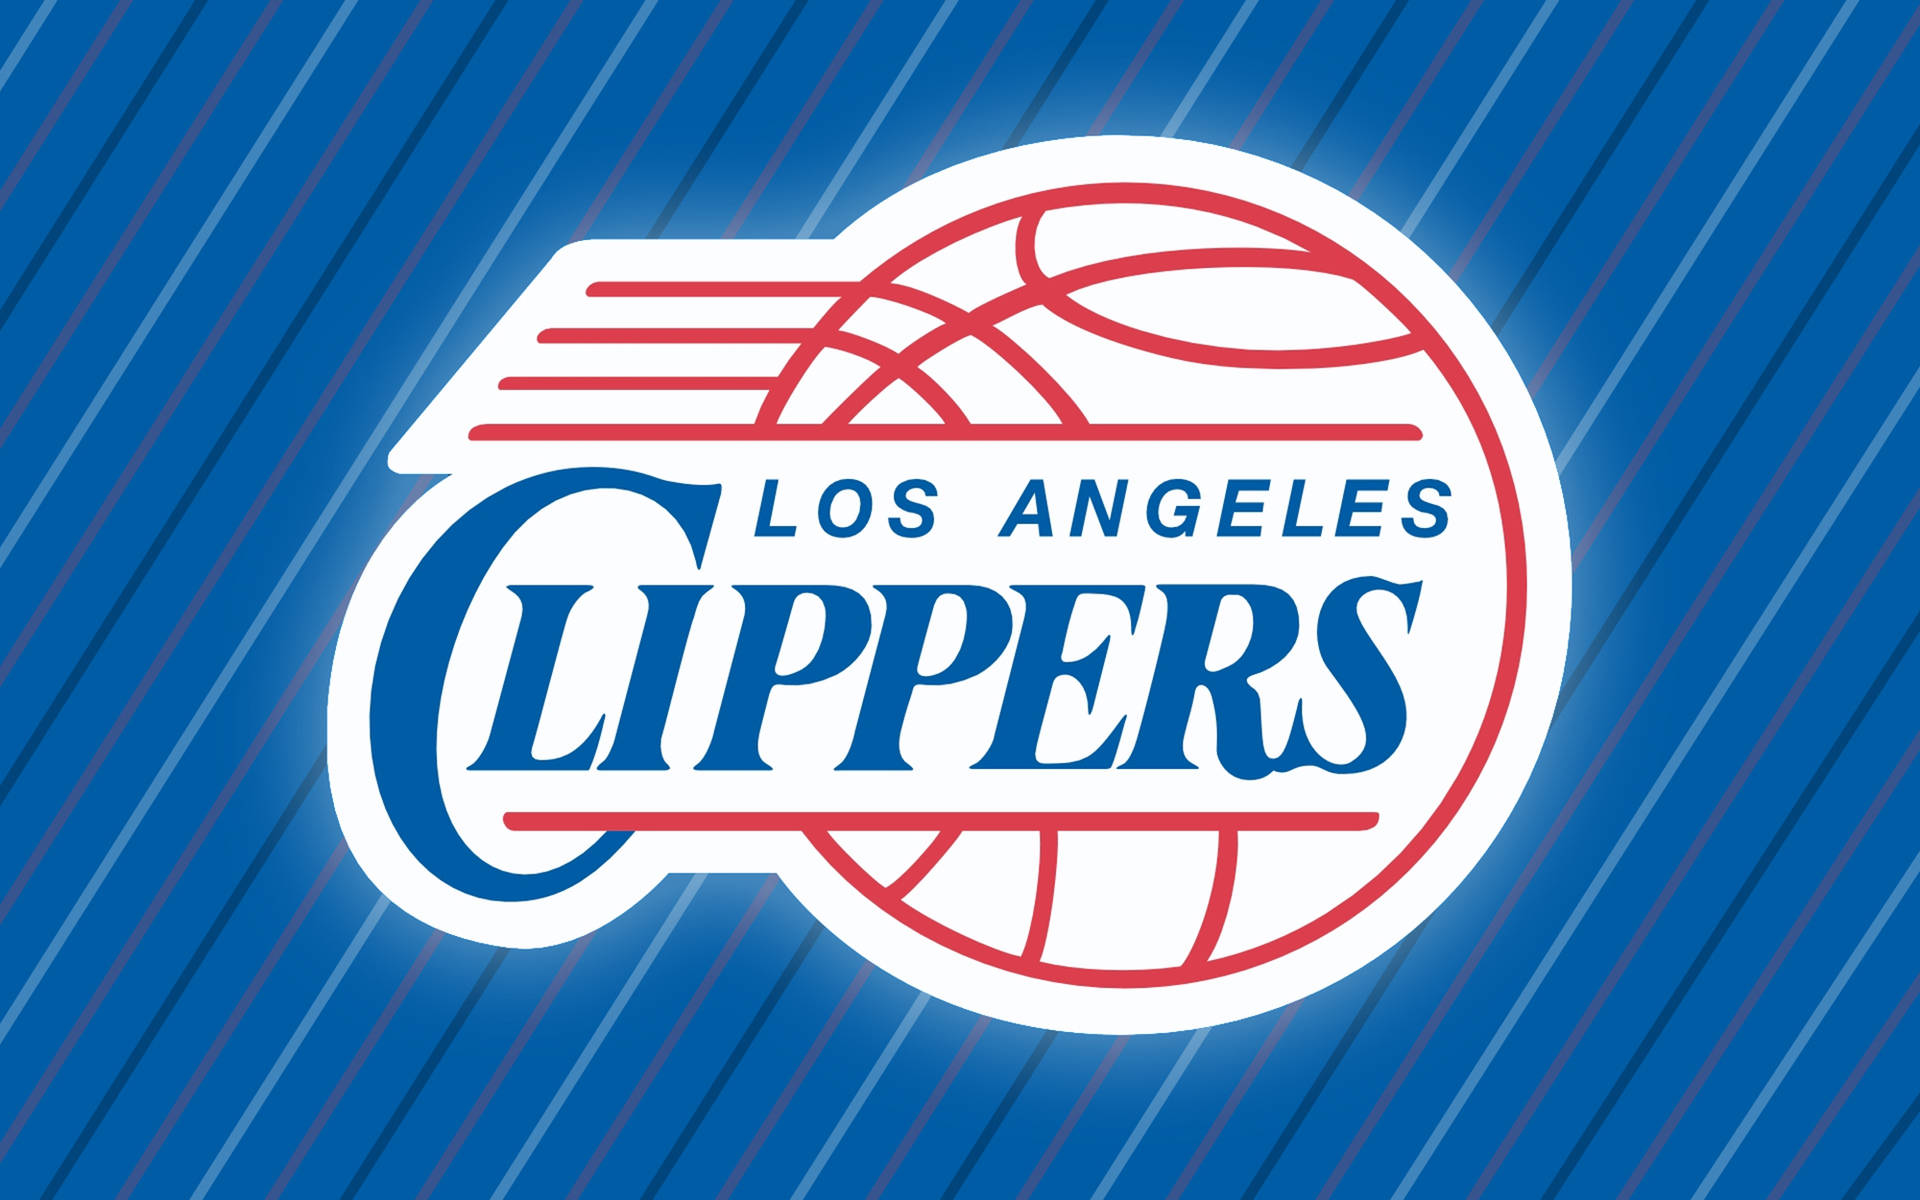 Caption: The Los Angeles Clippers Logo In Diagonal Stripe Style.